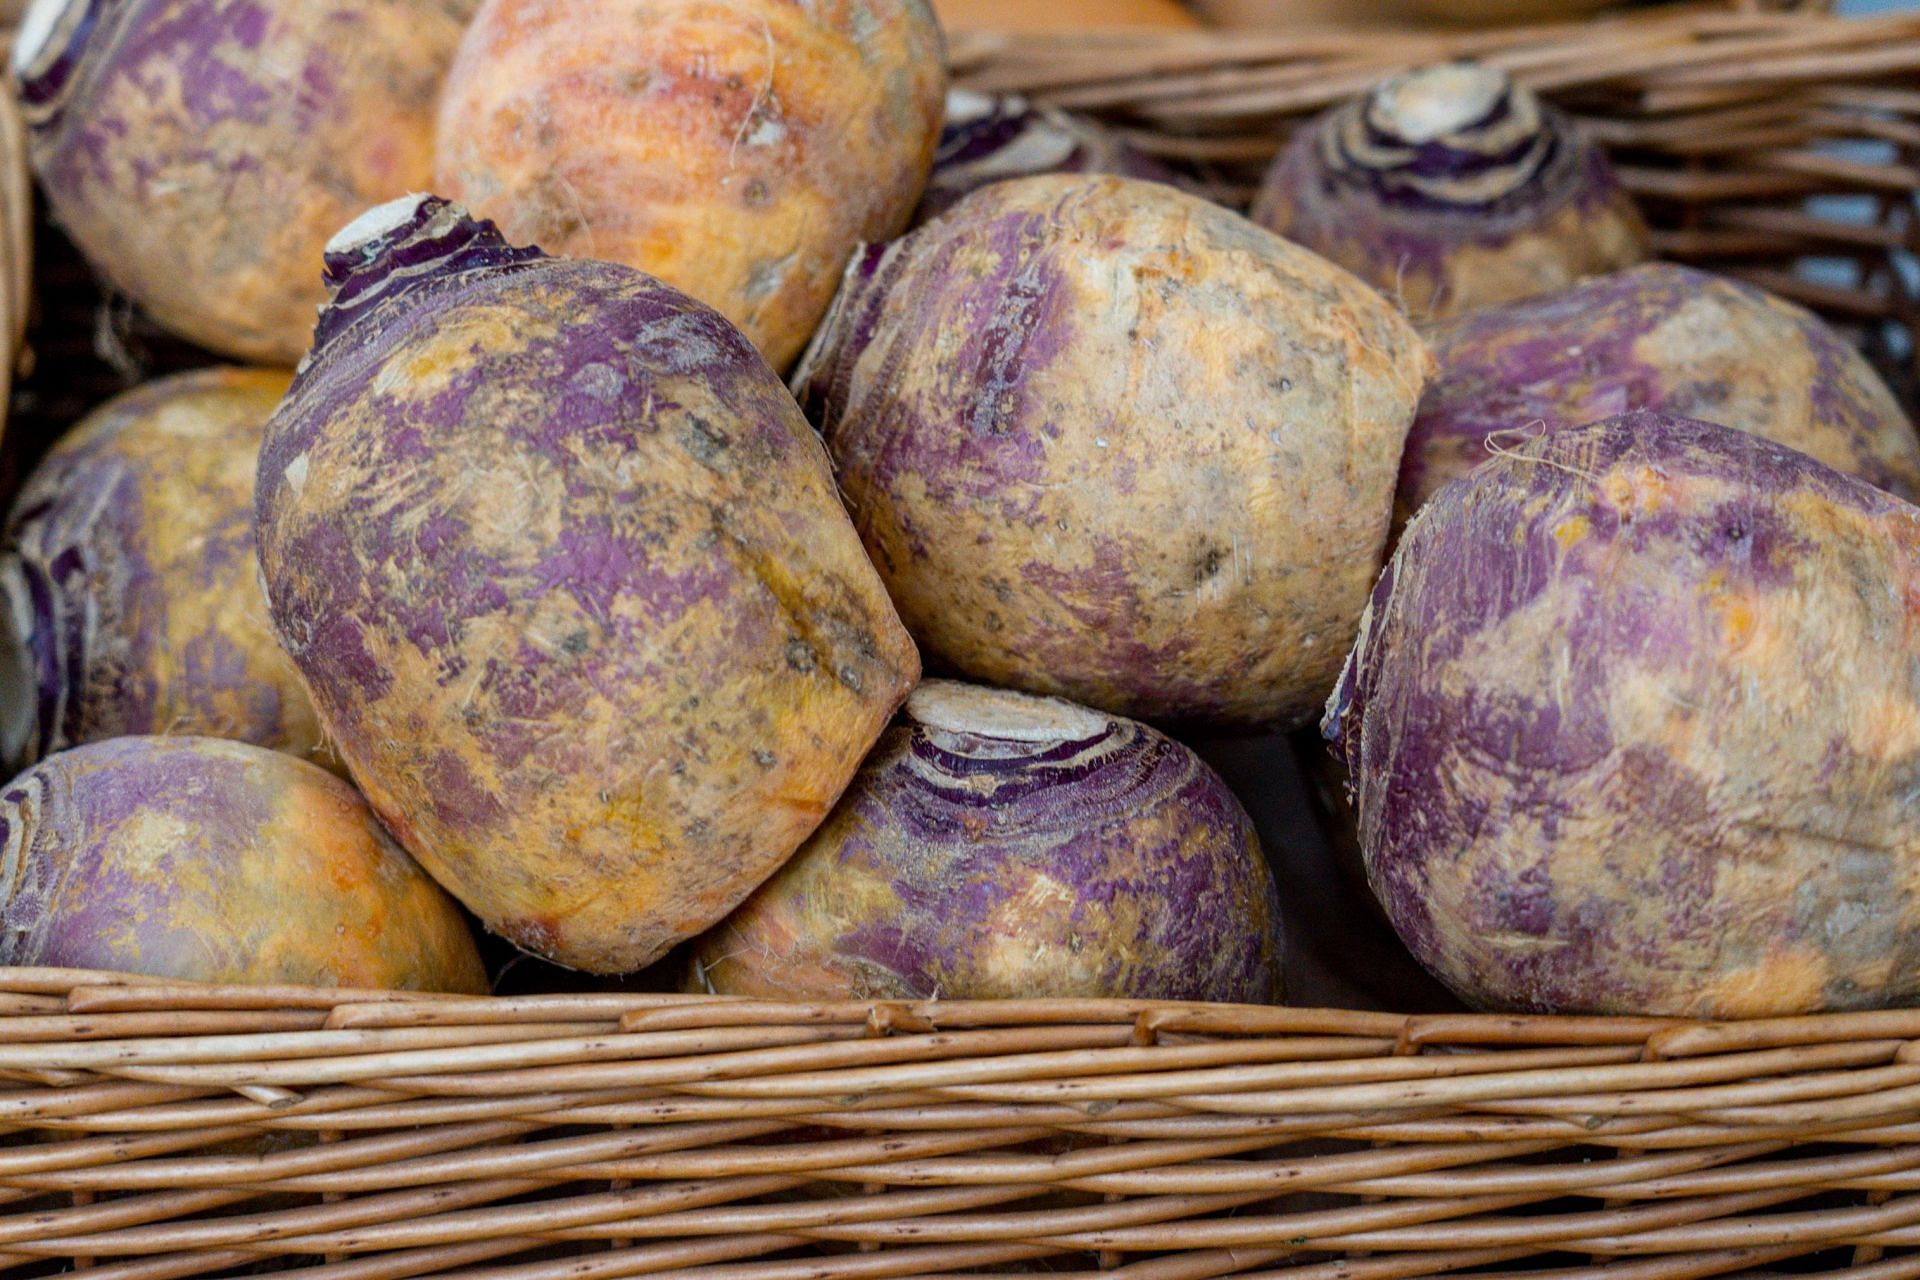 Rutabaga is loaded with nutrients and easy to cook. (Image via Unsplash / Nick Fewings)